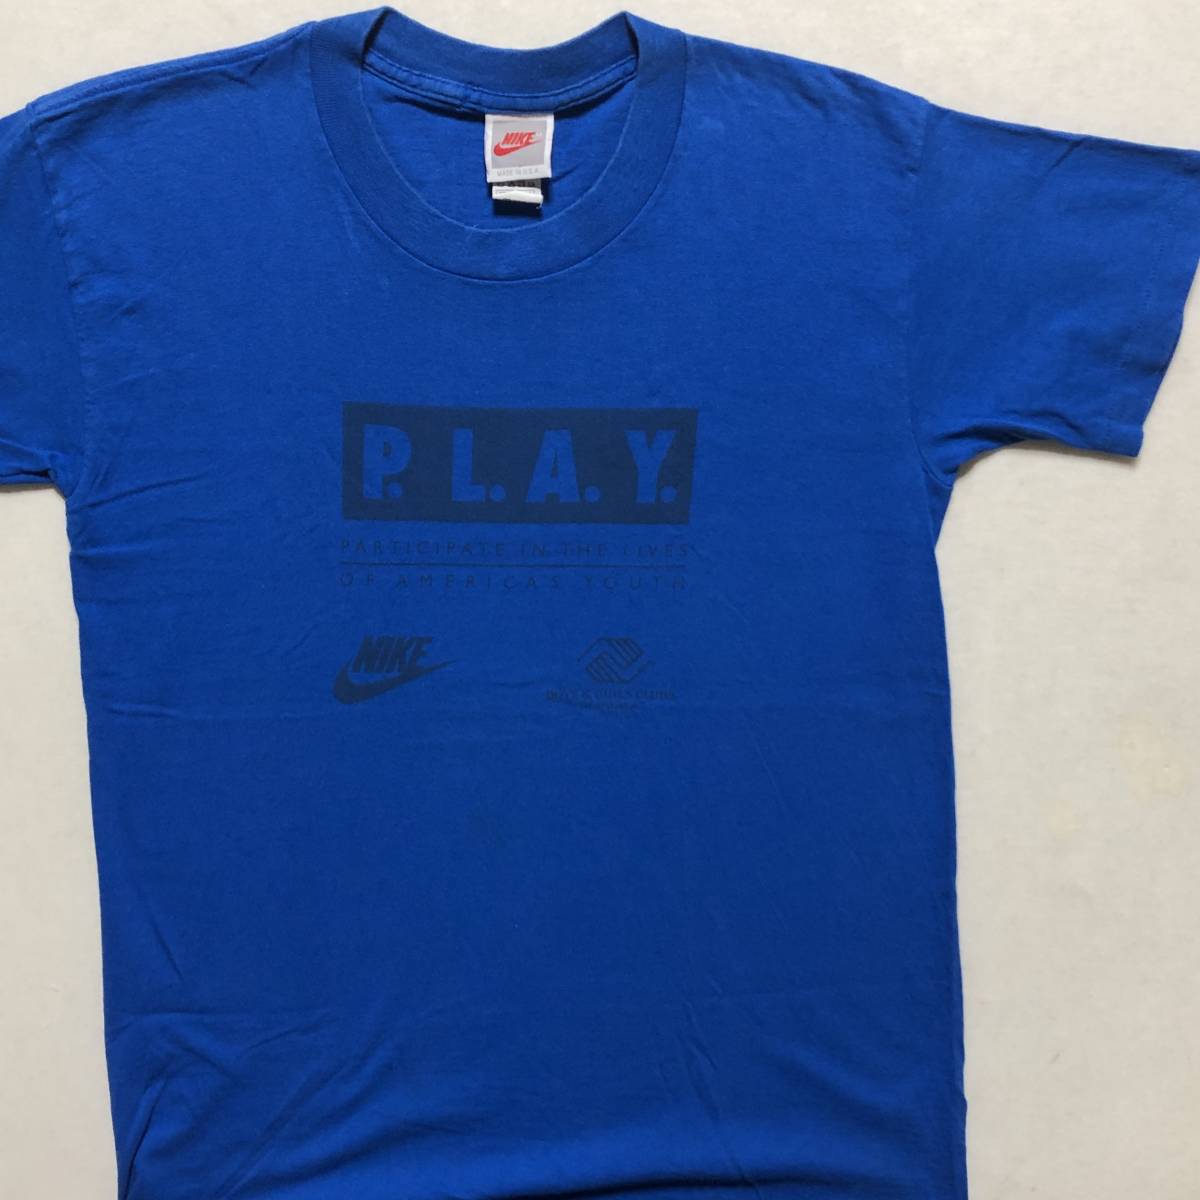 USA製 90年代 NIKE ナイキ PLAY(Participate in the Lives of America's Youth) Tシャツ 青 S 美品 管理B577